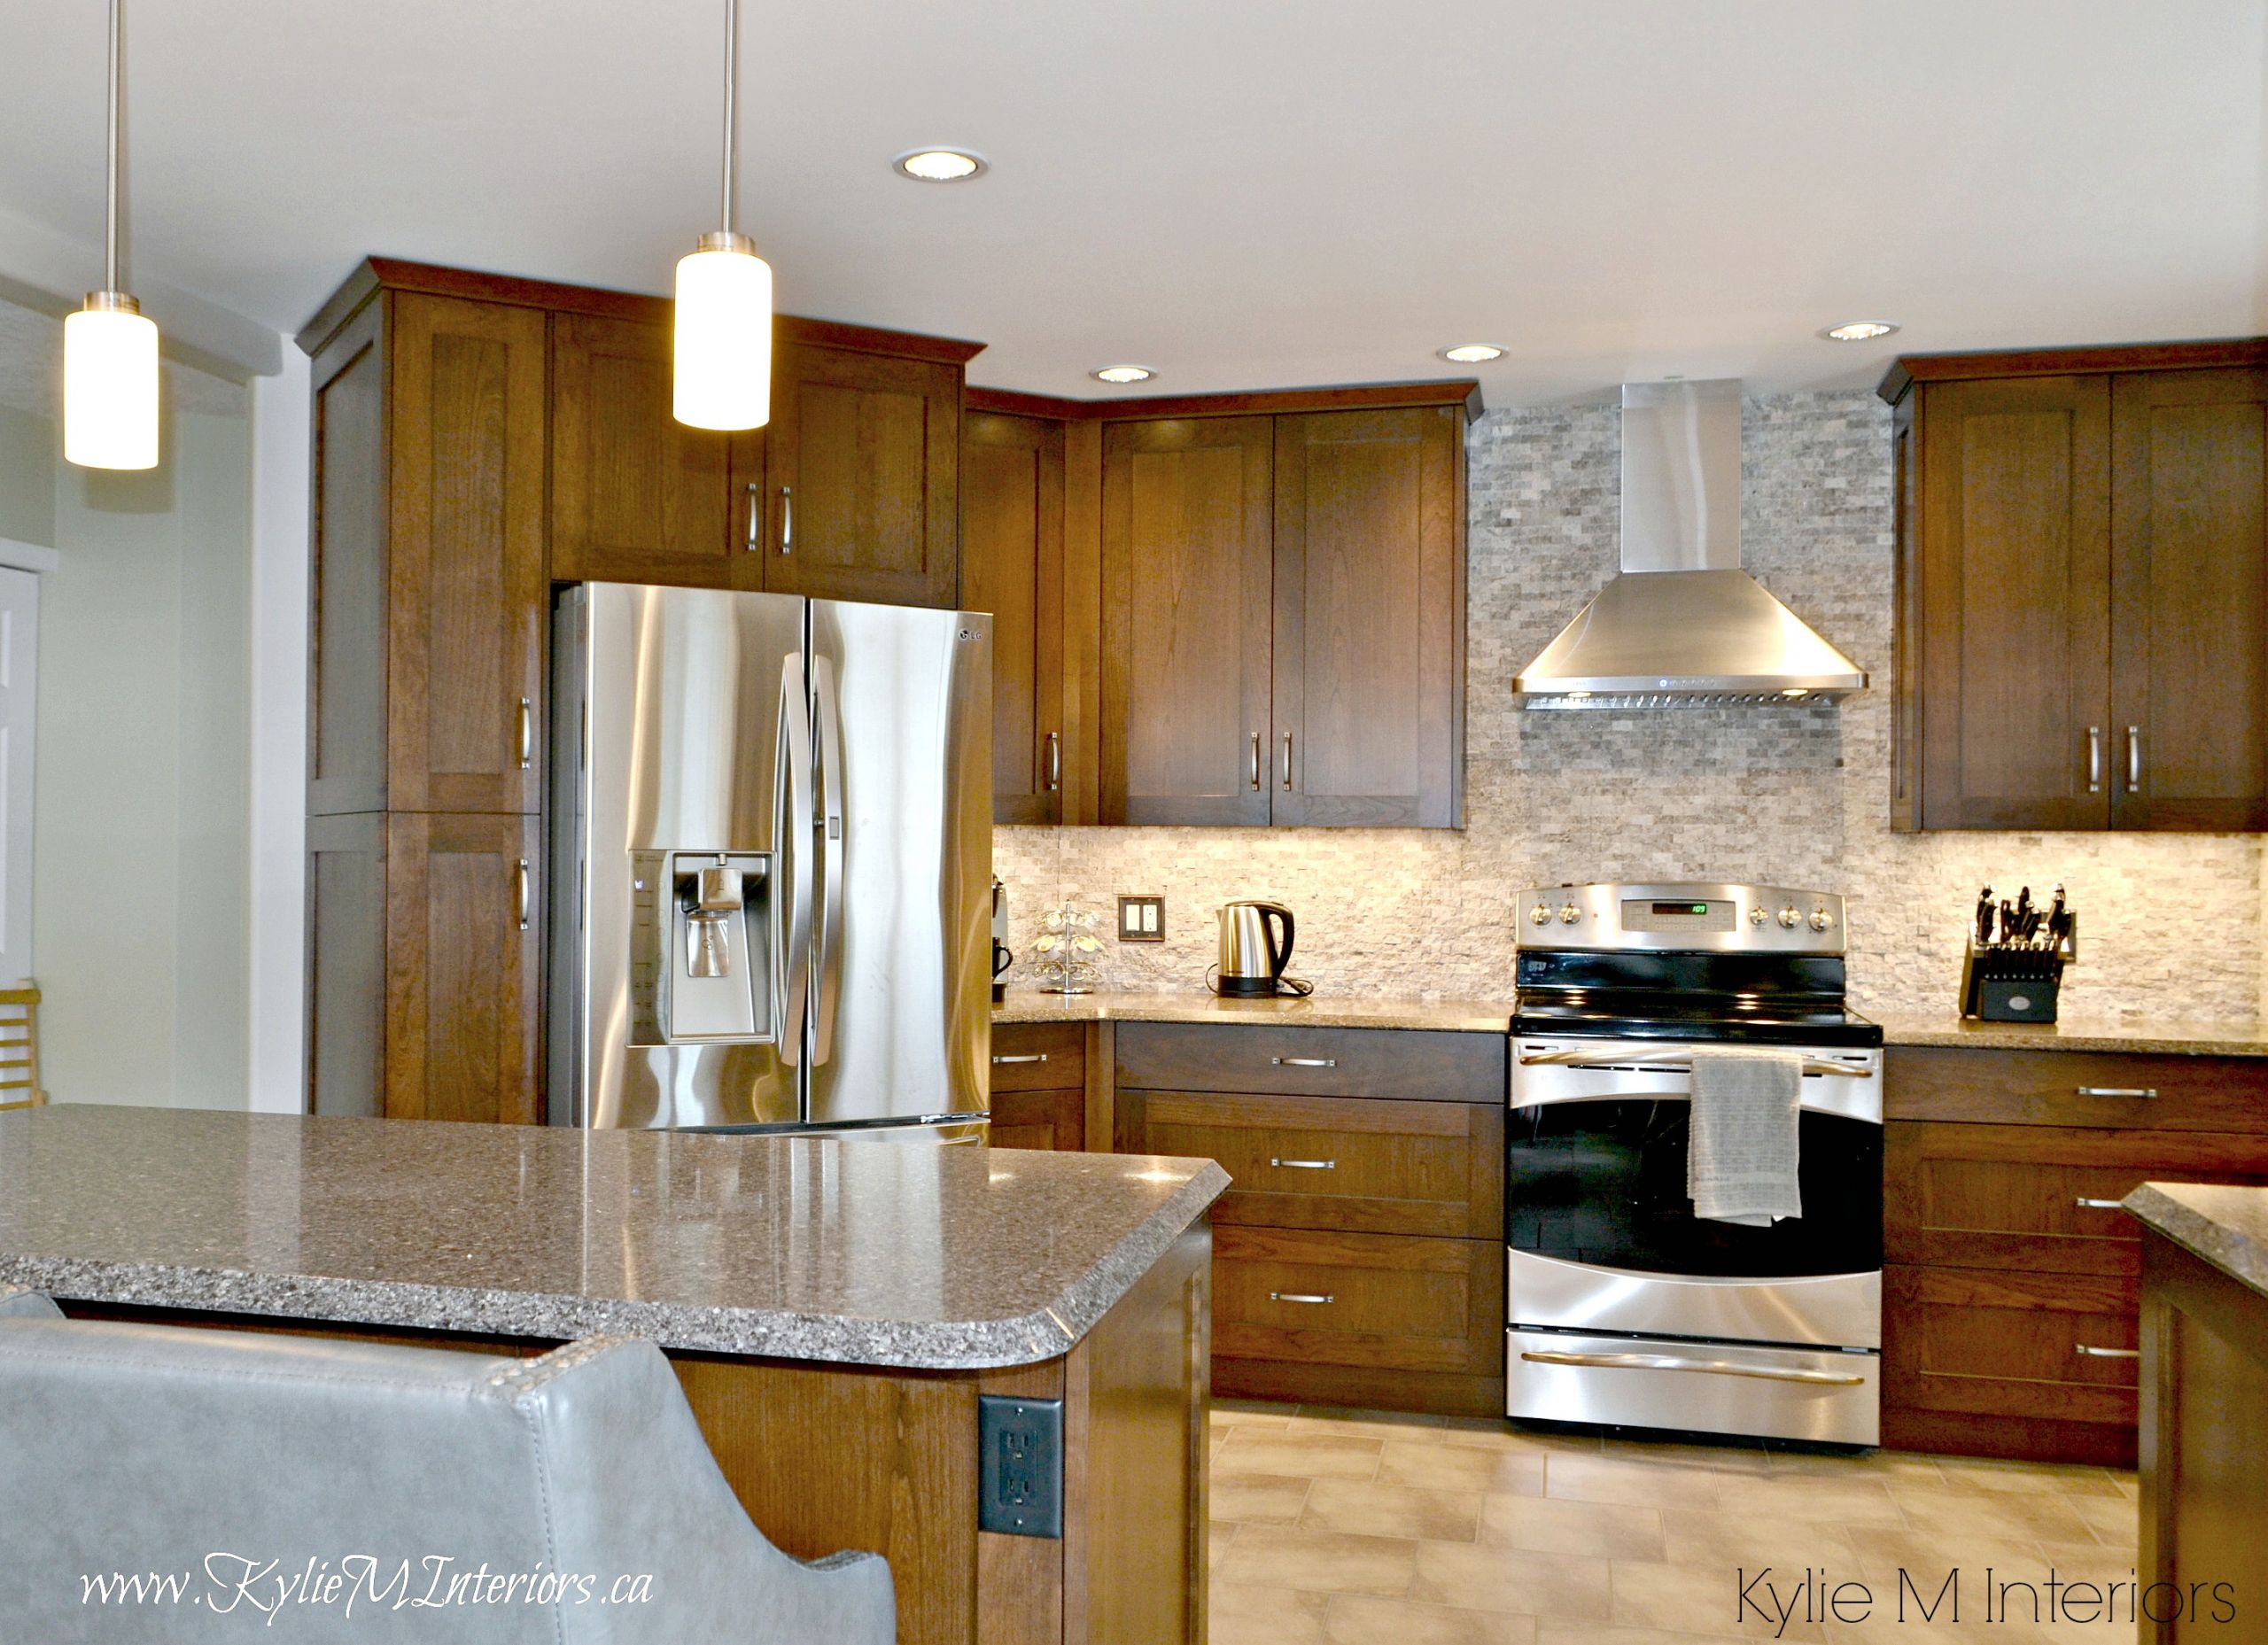 Kitchen Remodels With Oak Cabinets
 Oak kitchen remodel Wood cabinets quartz countertops and